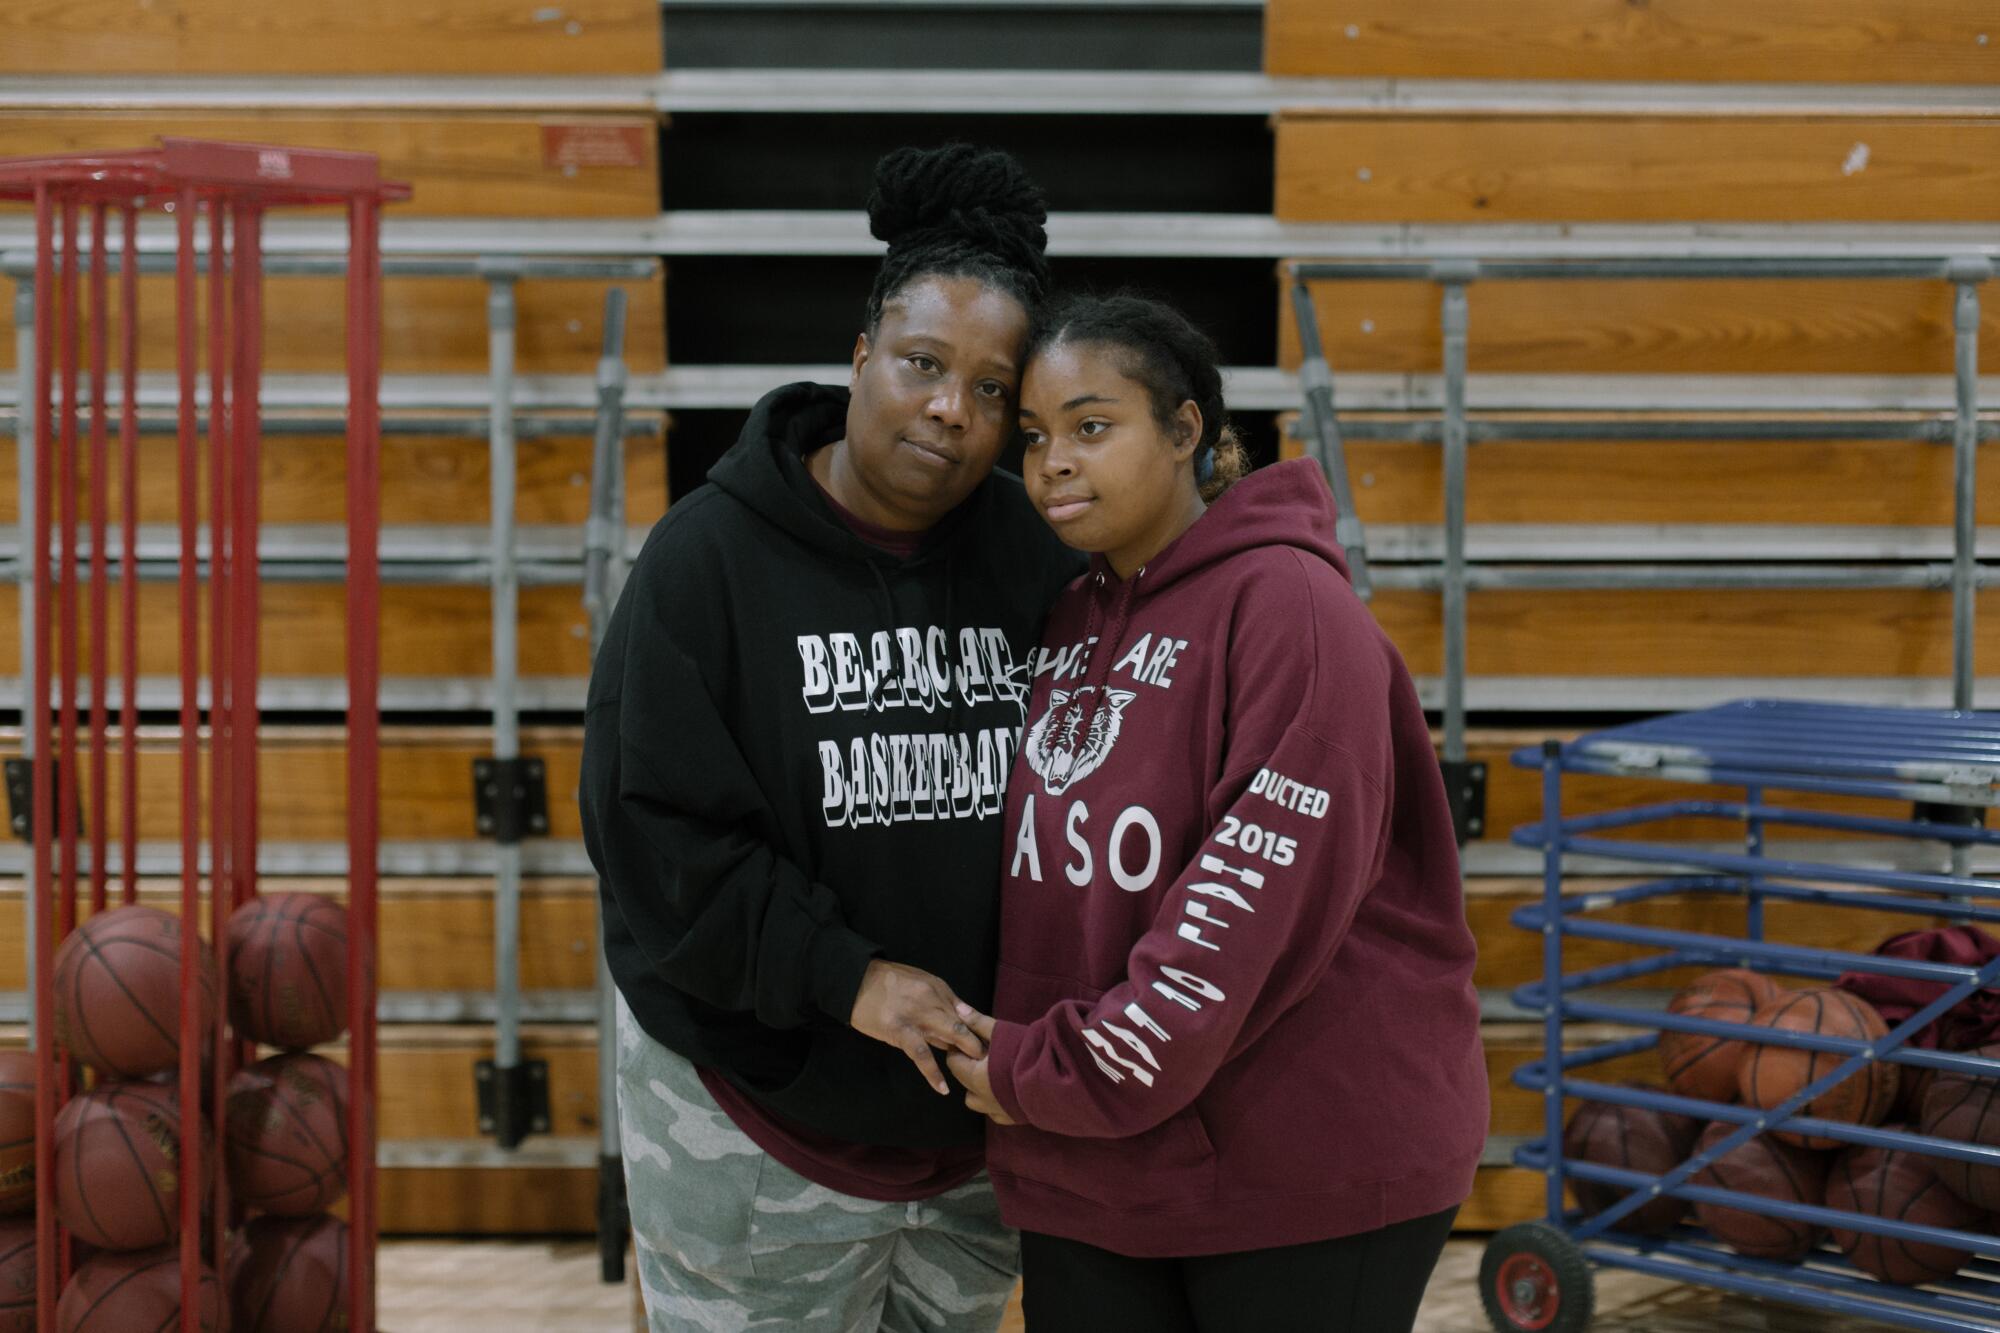 A woman and girl in Paso Robles High Bearcats sweatshirts leaning in to each other next to cages of basketballs in a gym.